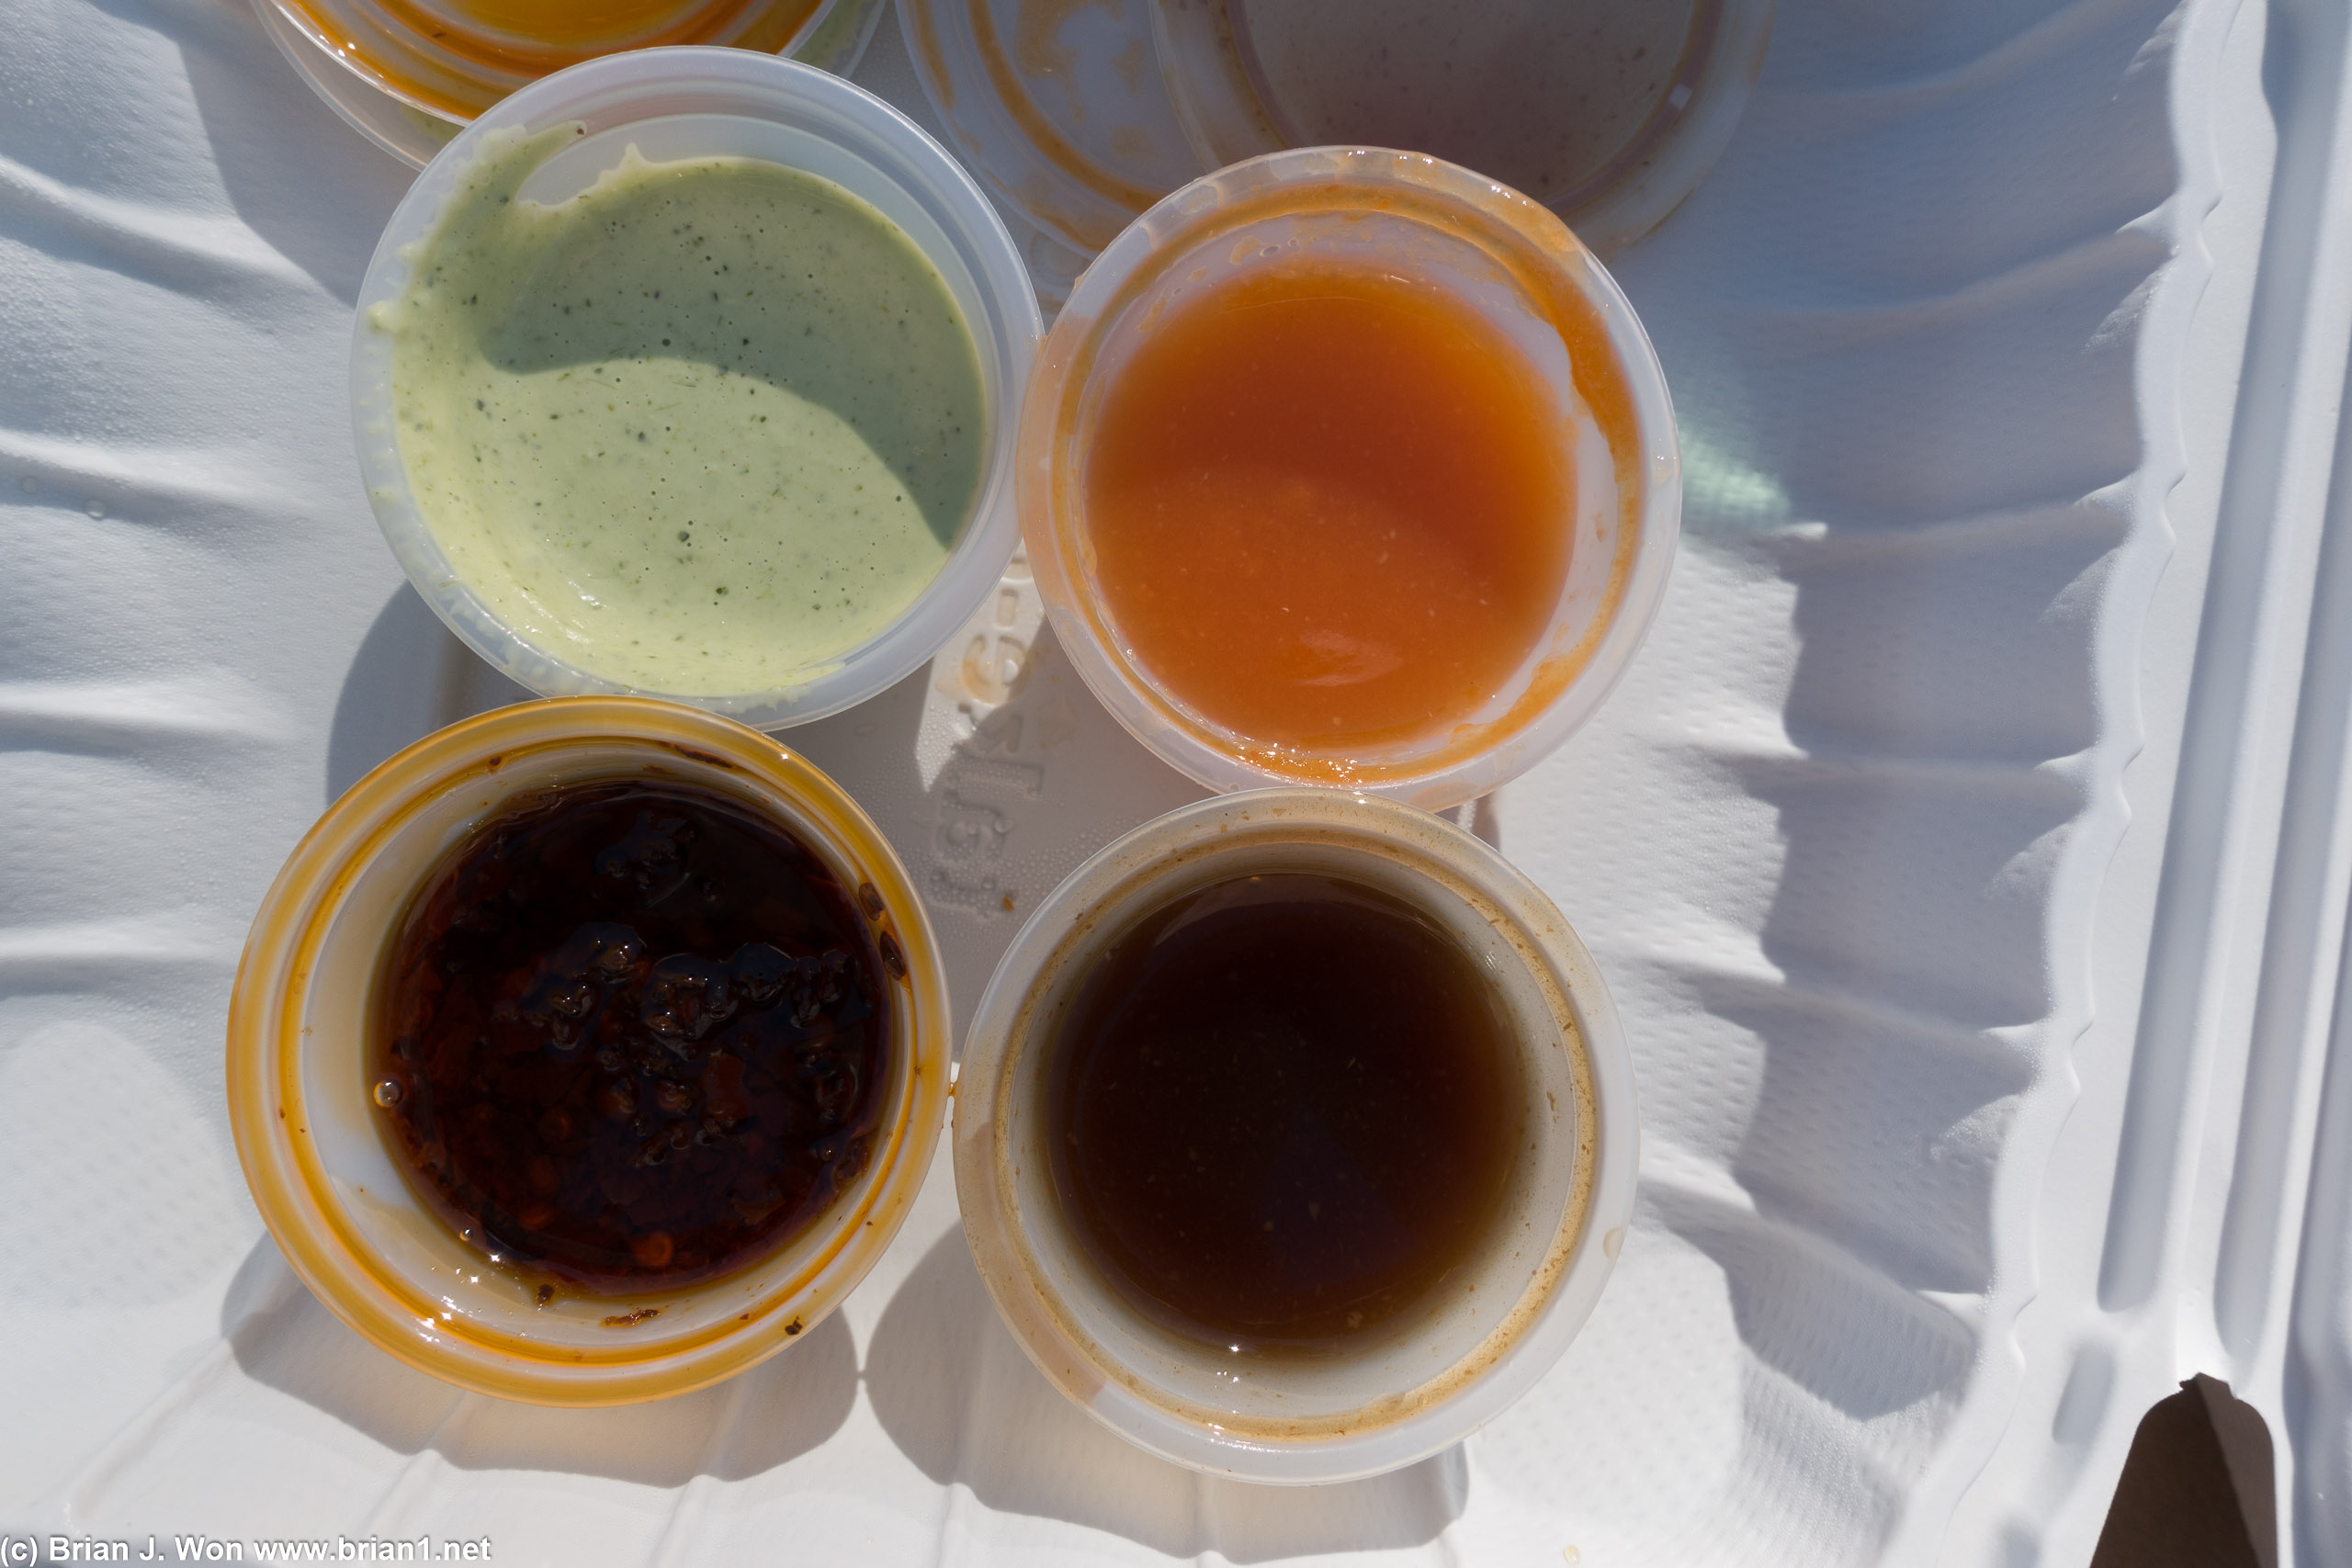 Sauces. Top left was avocado, rest were kinda-sorta-Chinese but not quite?